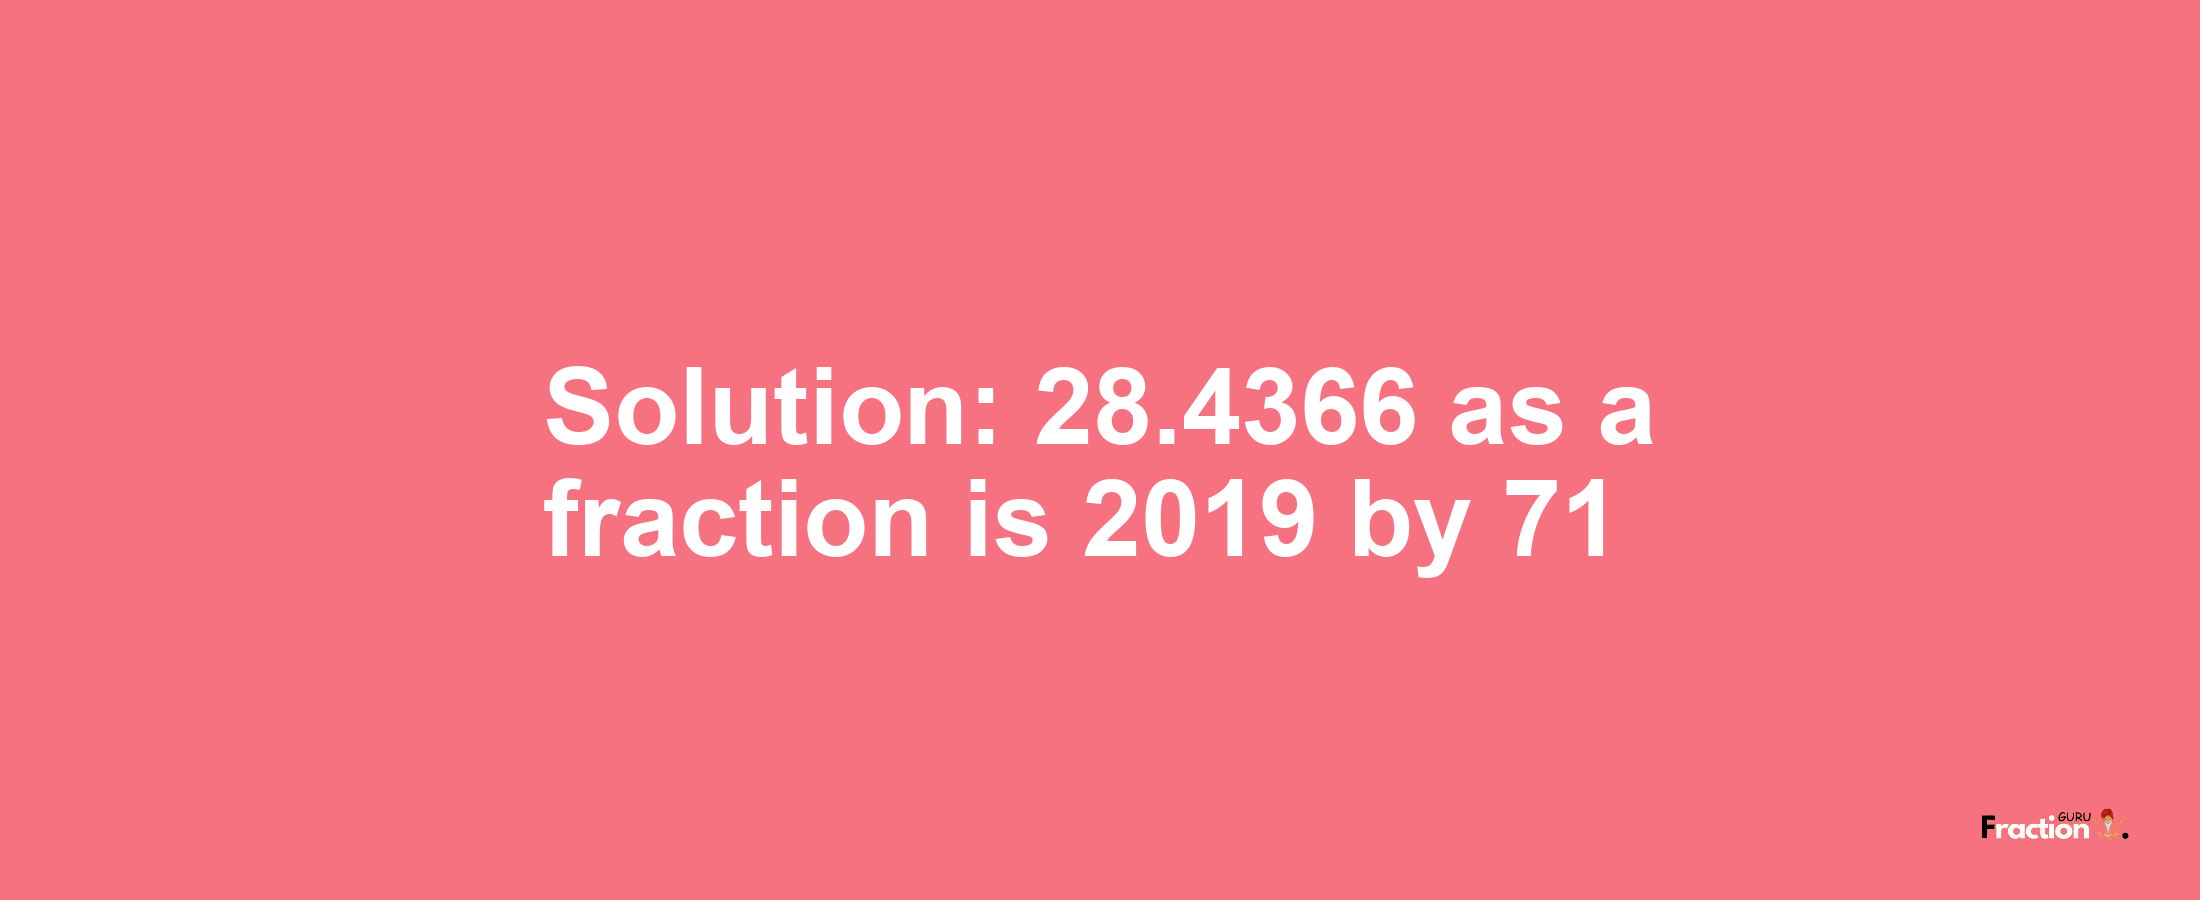 Solution:28.4366 as a fraction is 2019/71